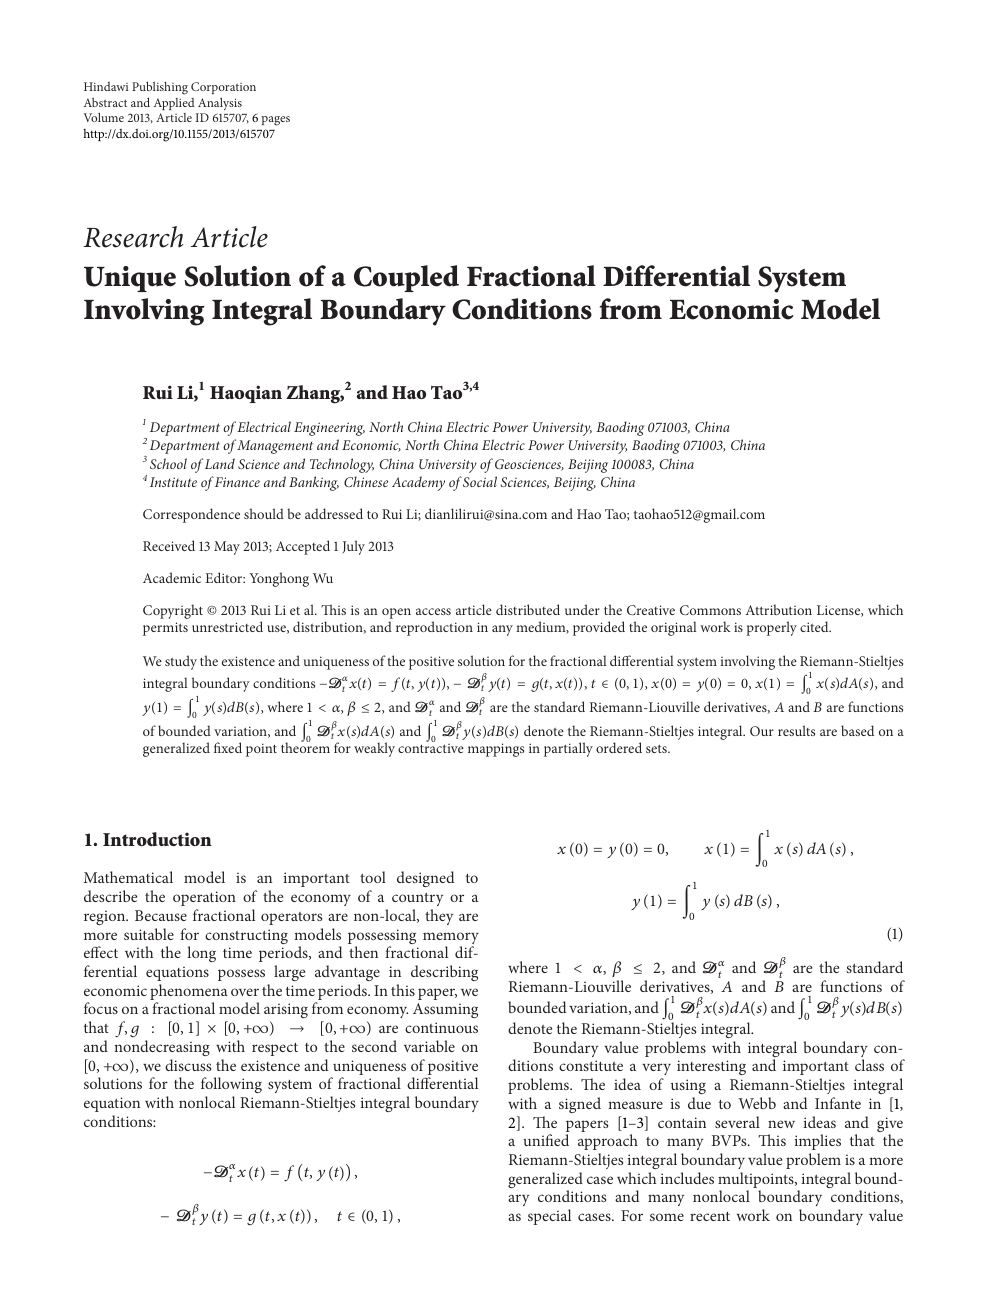 Unique Solution Of A Coupled Fractional Differential System Involving Integral Boundary Conditions From Economic Model Topic Of Research Paper In Mathematics Download Scholarly Article Pdf And Read For Free On Cyberleninka